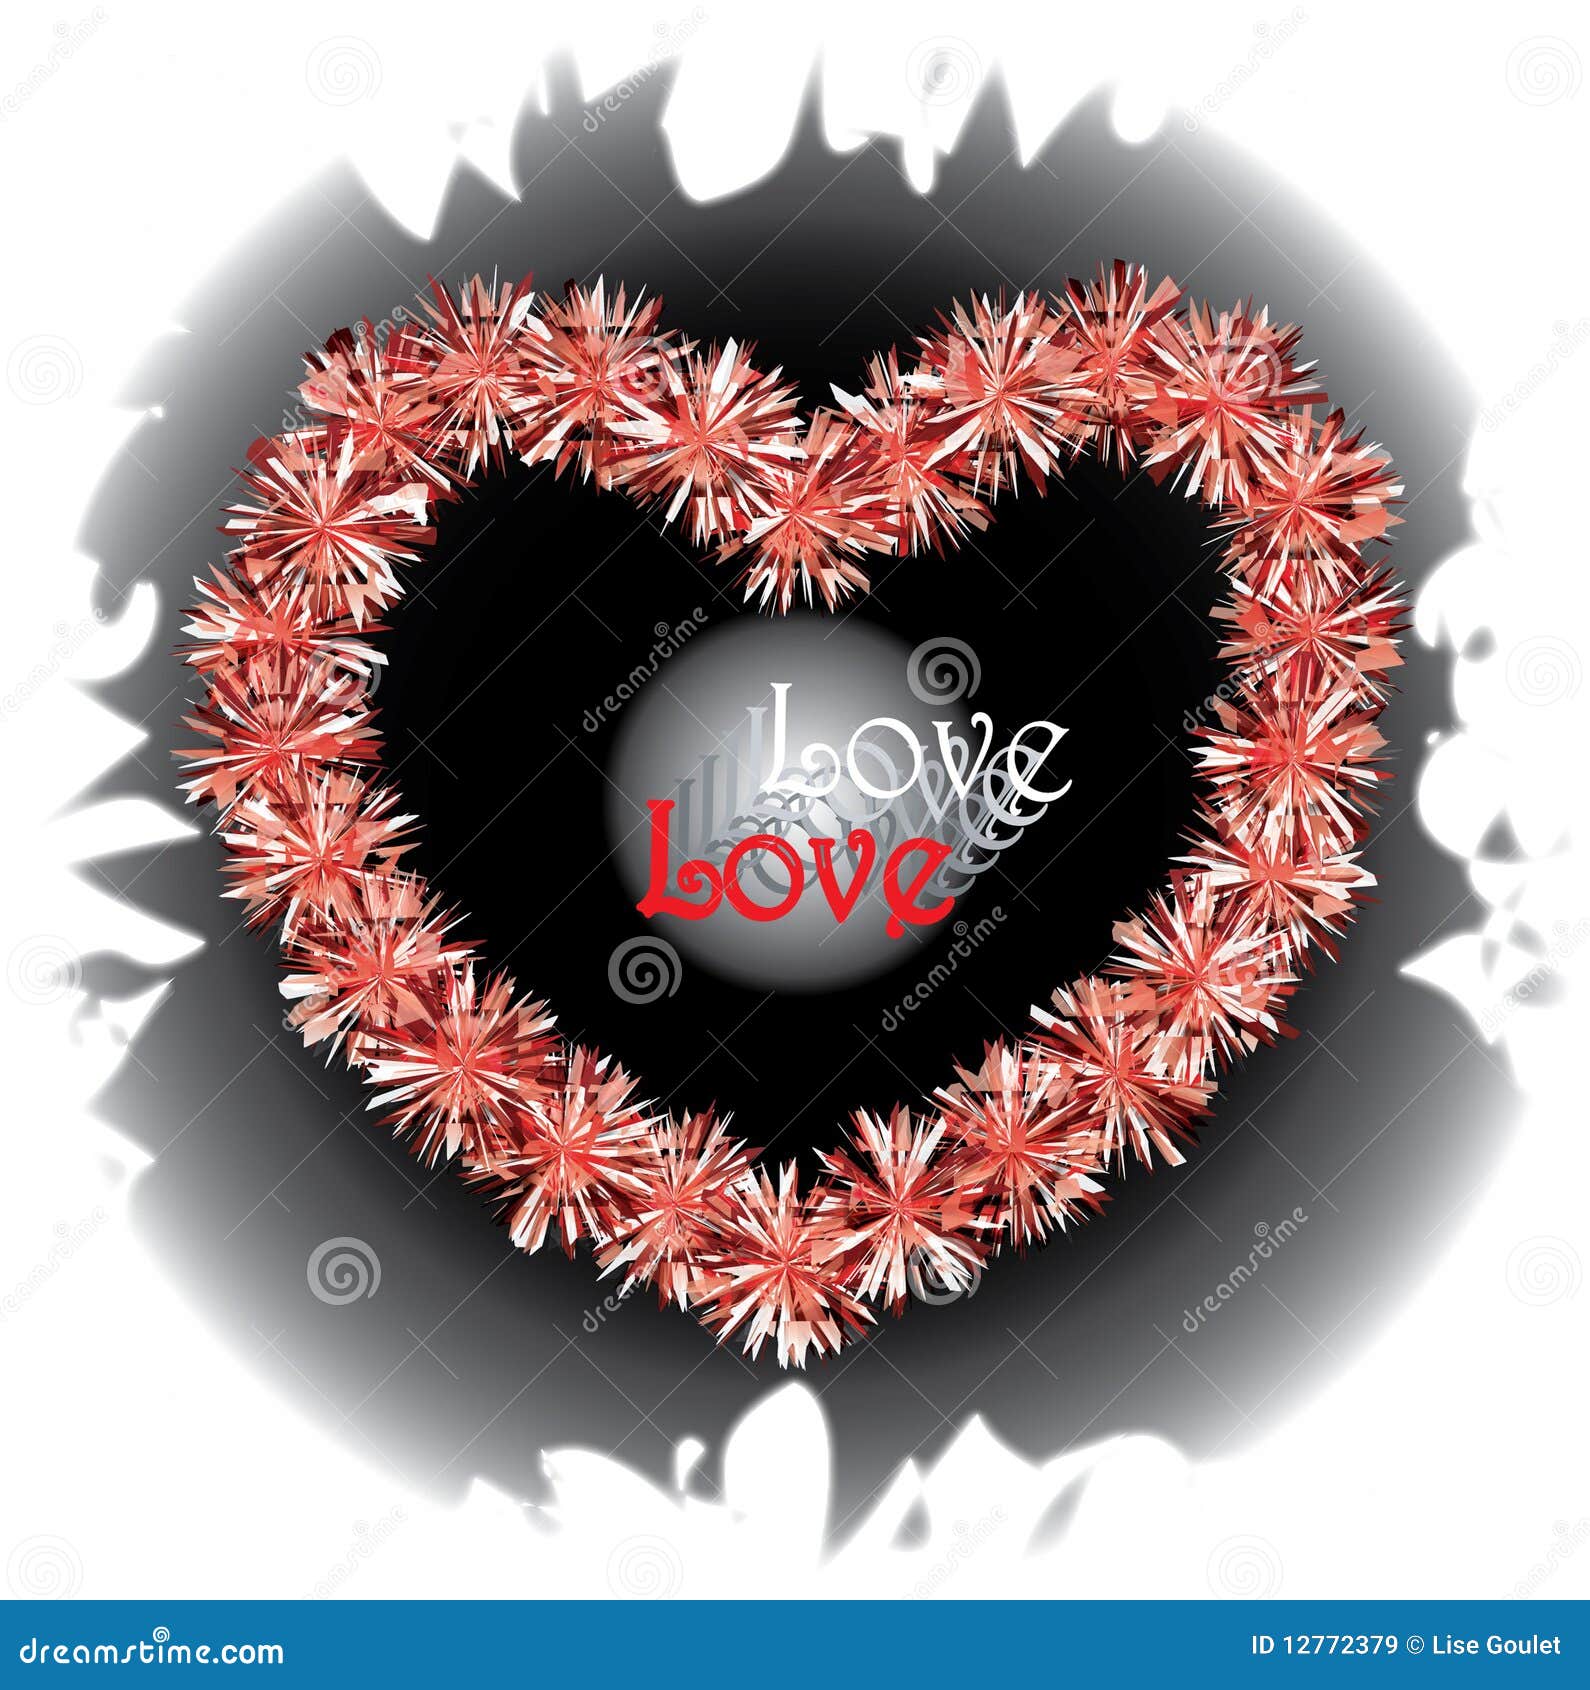 Red Heart Cheerleading Pompoms Pattern